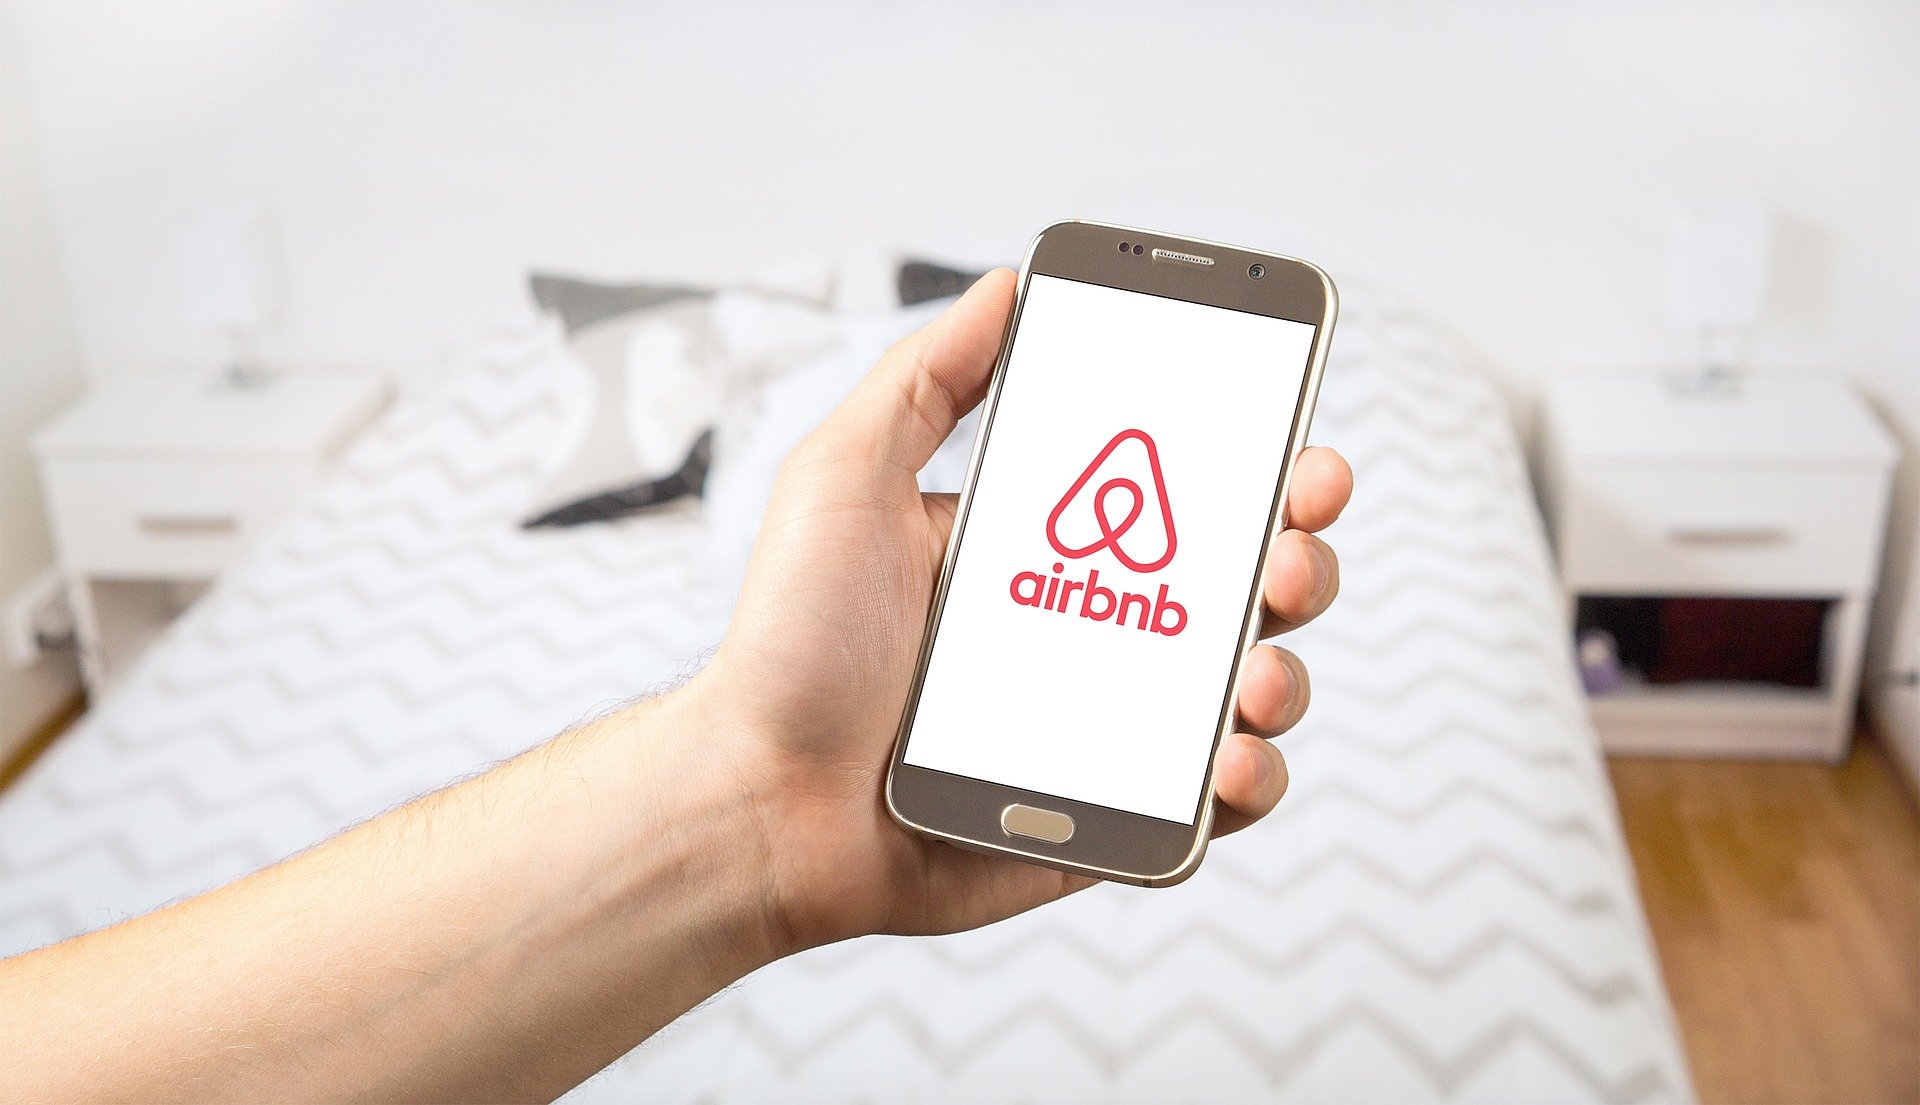 #Planning a big bash? Airbnb debuts technology to block that